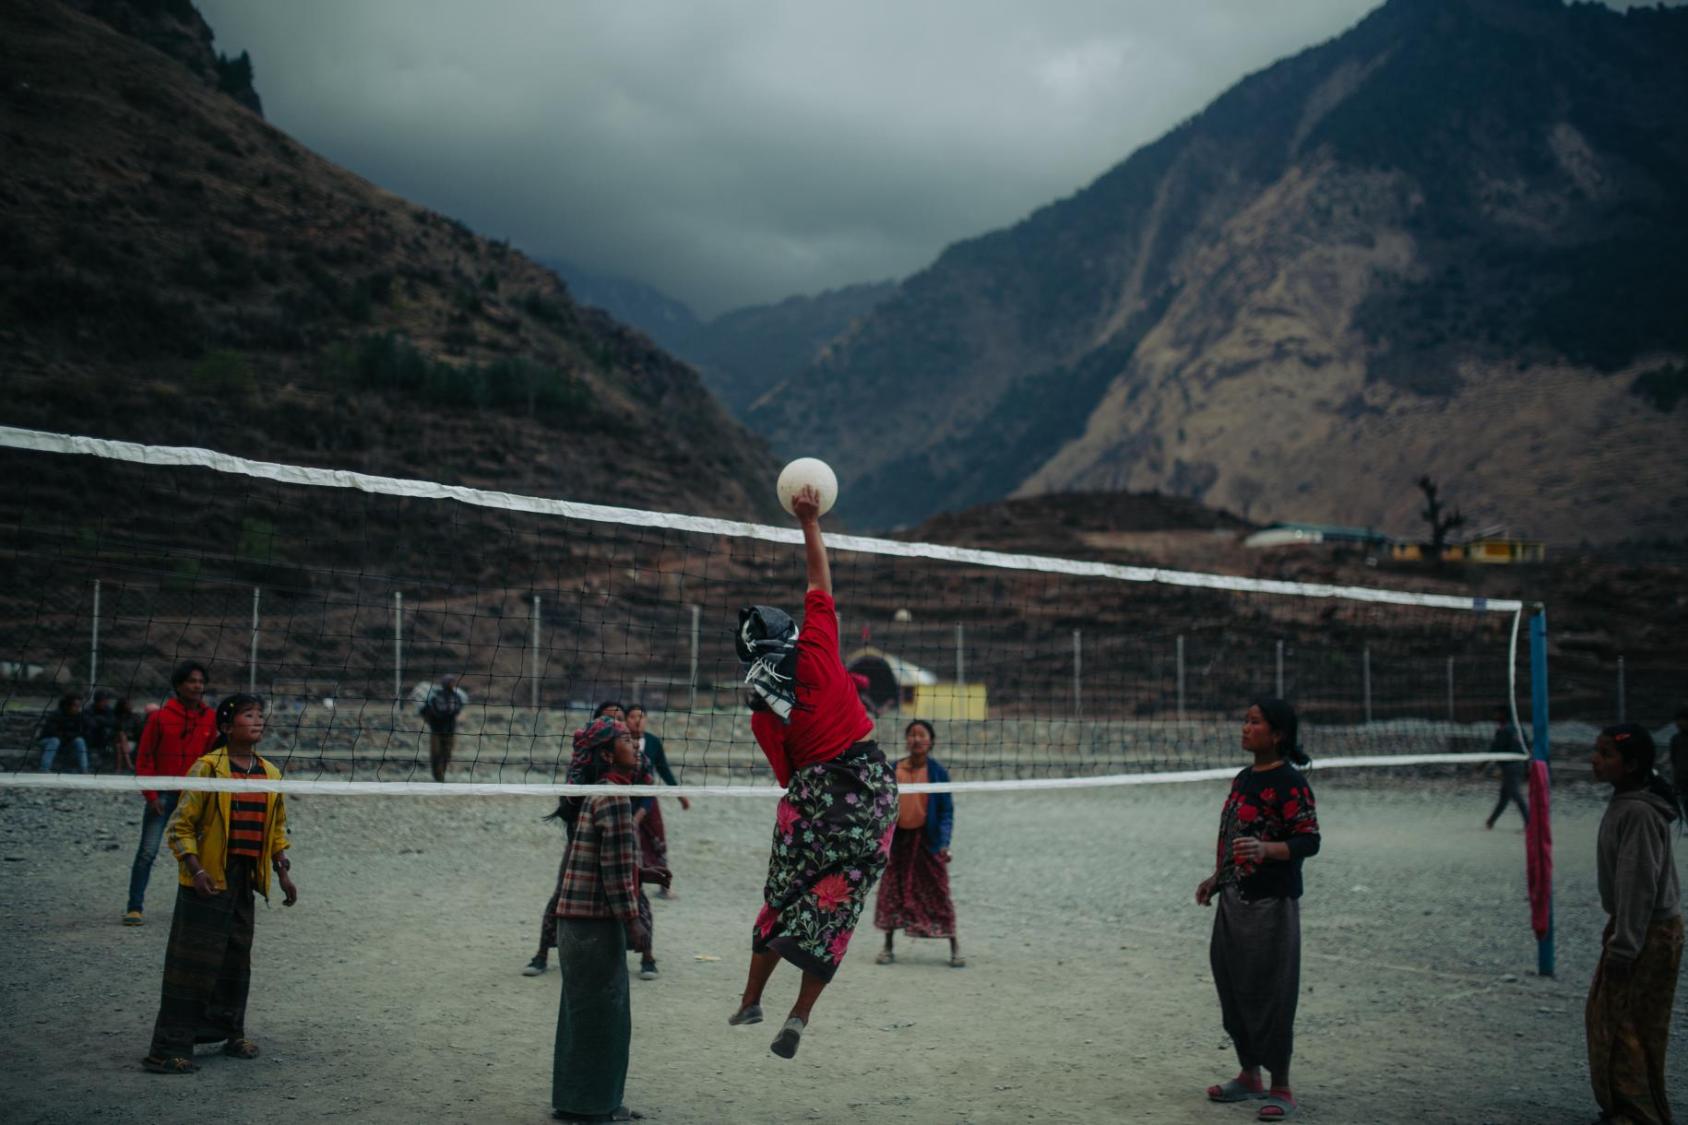 Against mountains in the background, a group of women in colourful red clothes play volleyball over a net in Nepal